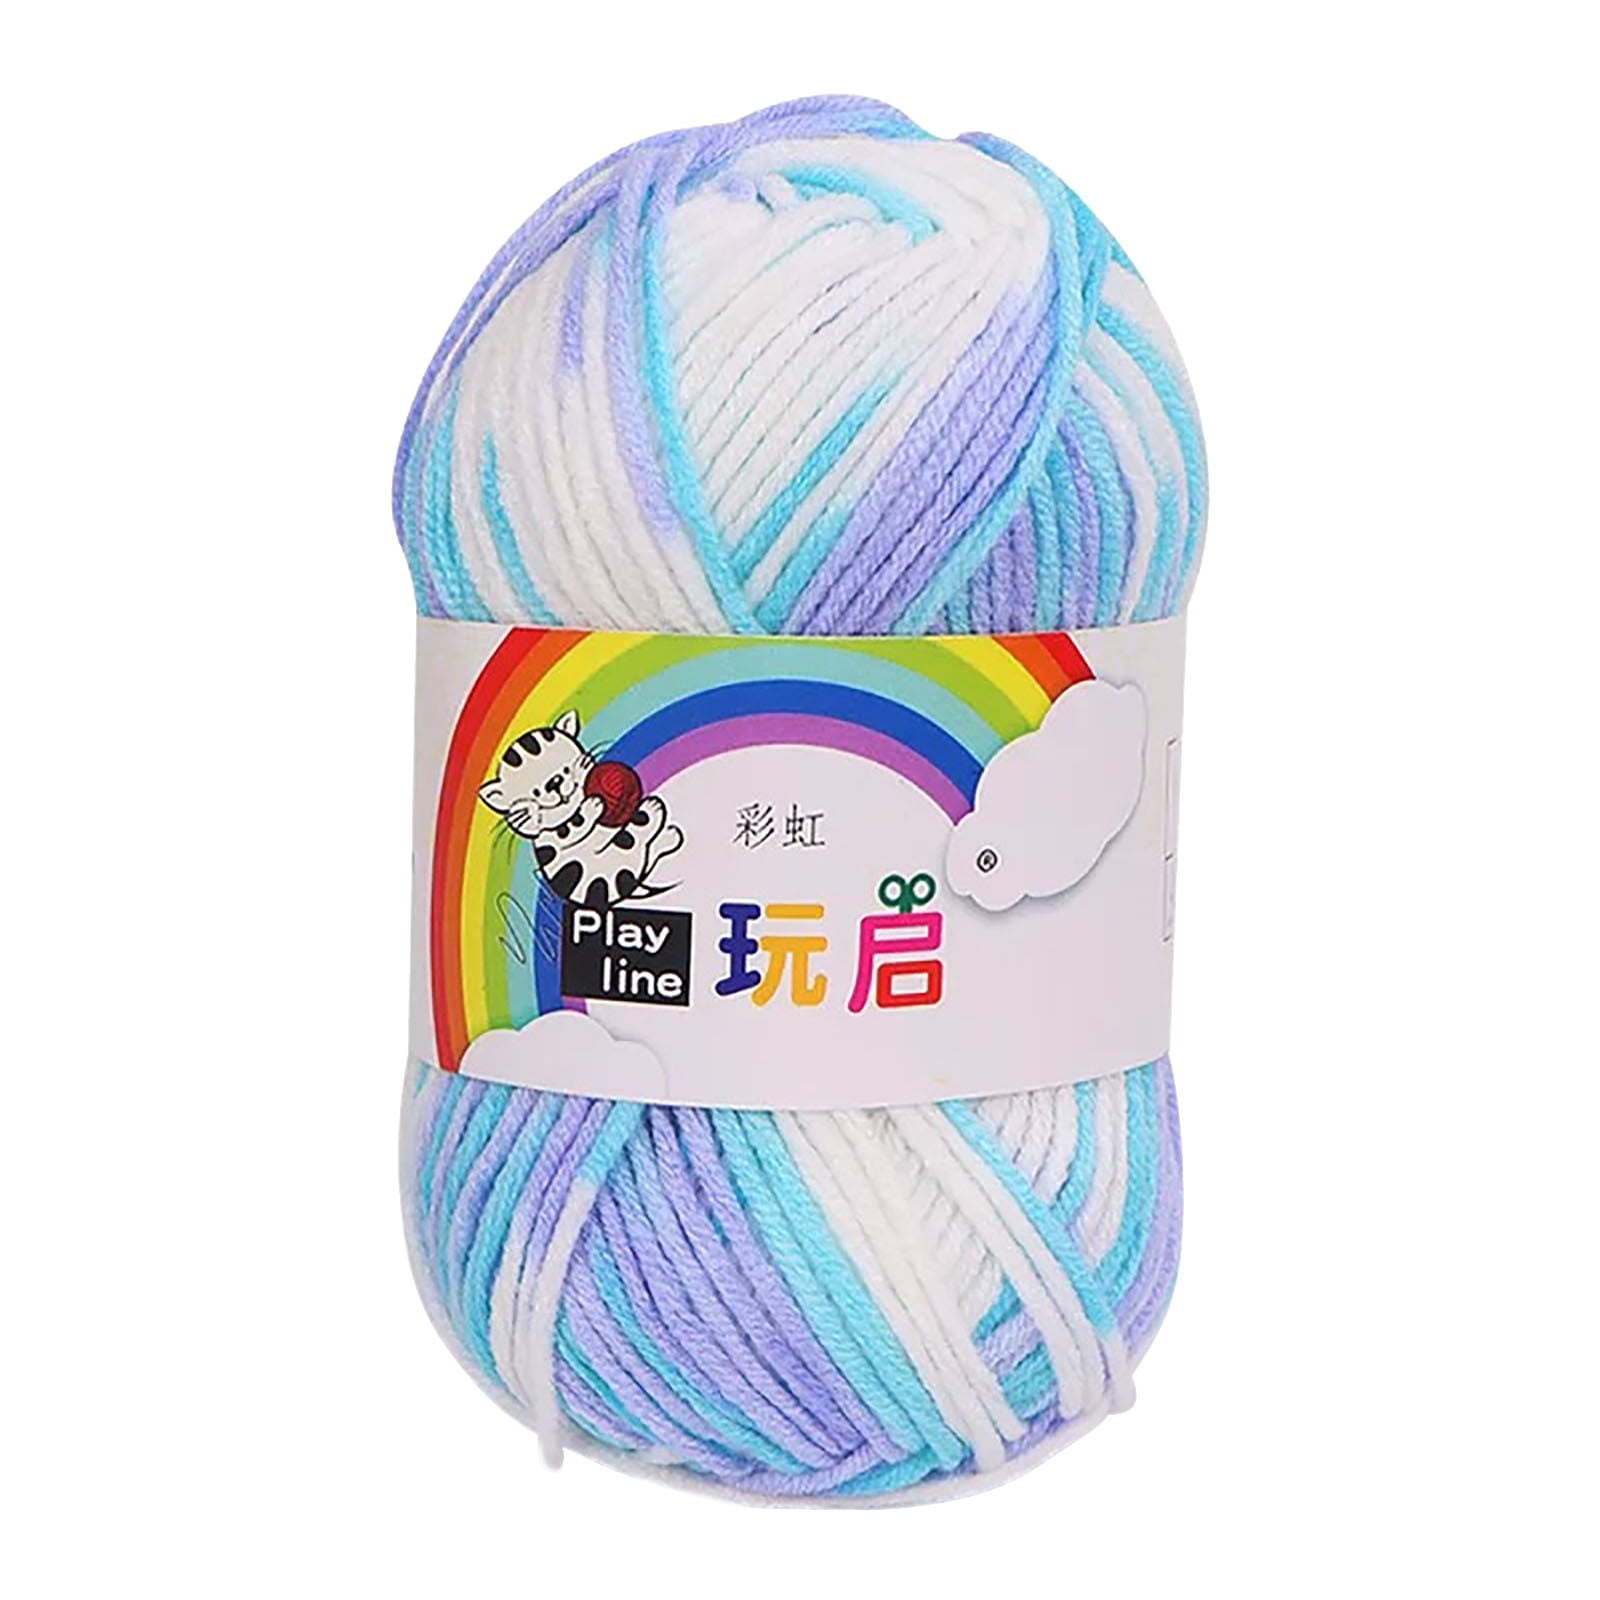 XMMSWDLA Home Cotton Cone Yarn, Ideal Knitting And Crochet Supplies ...